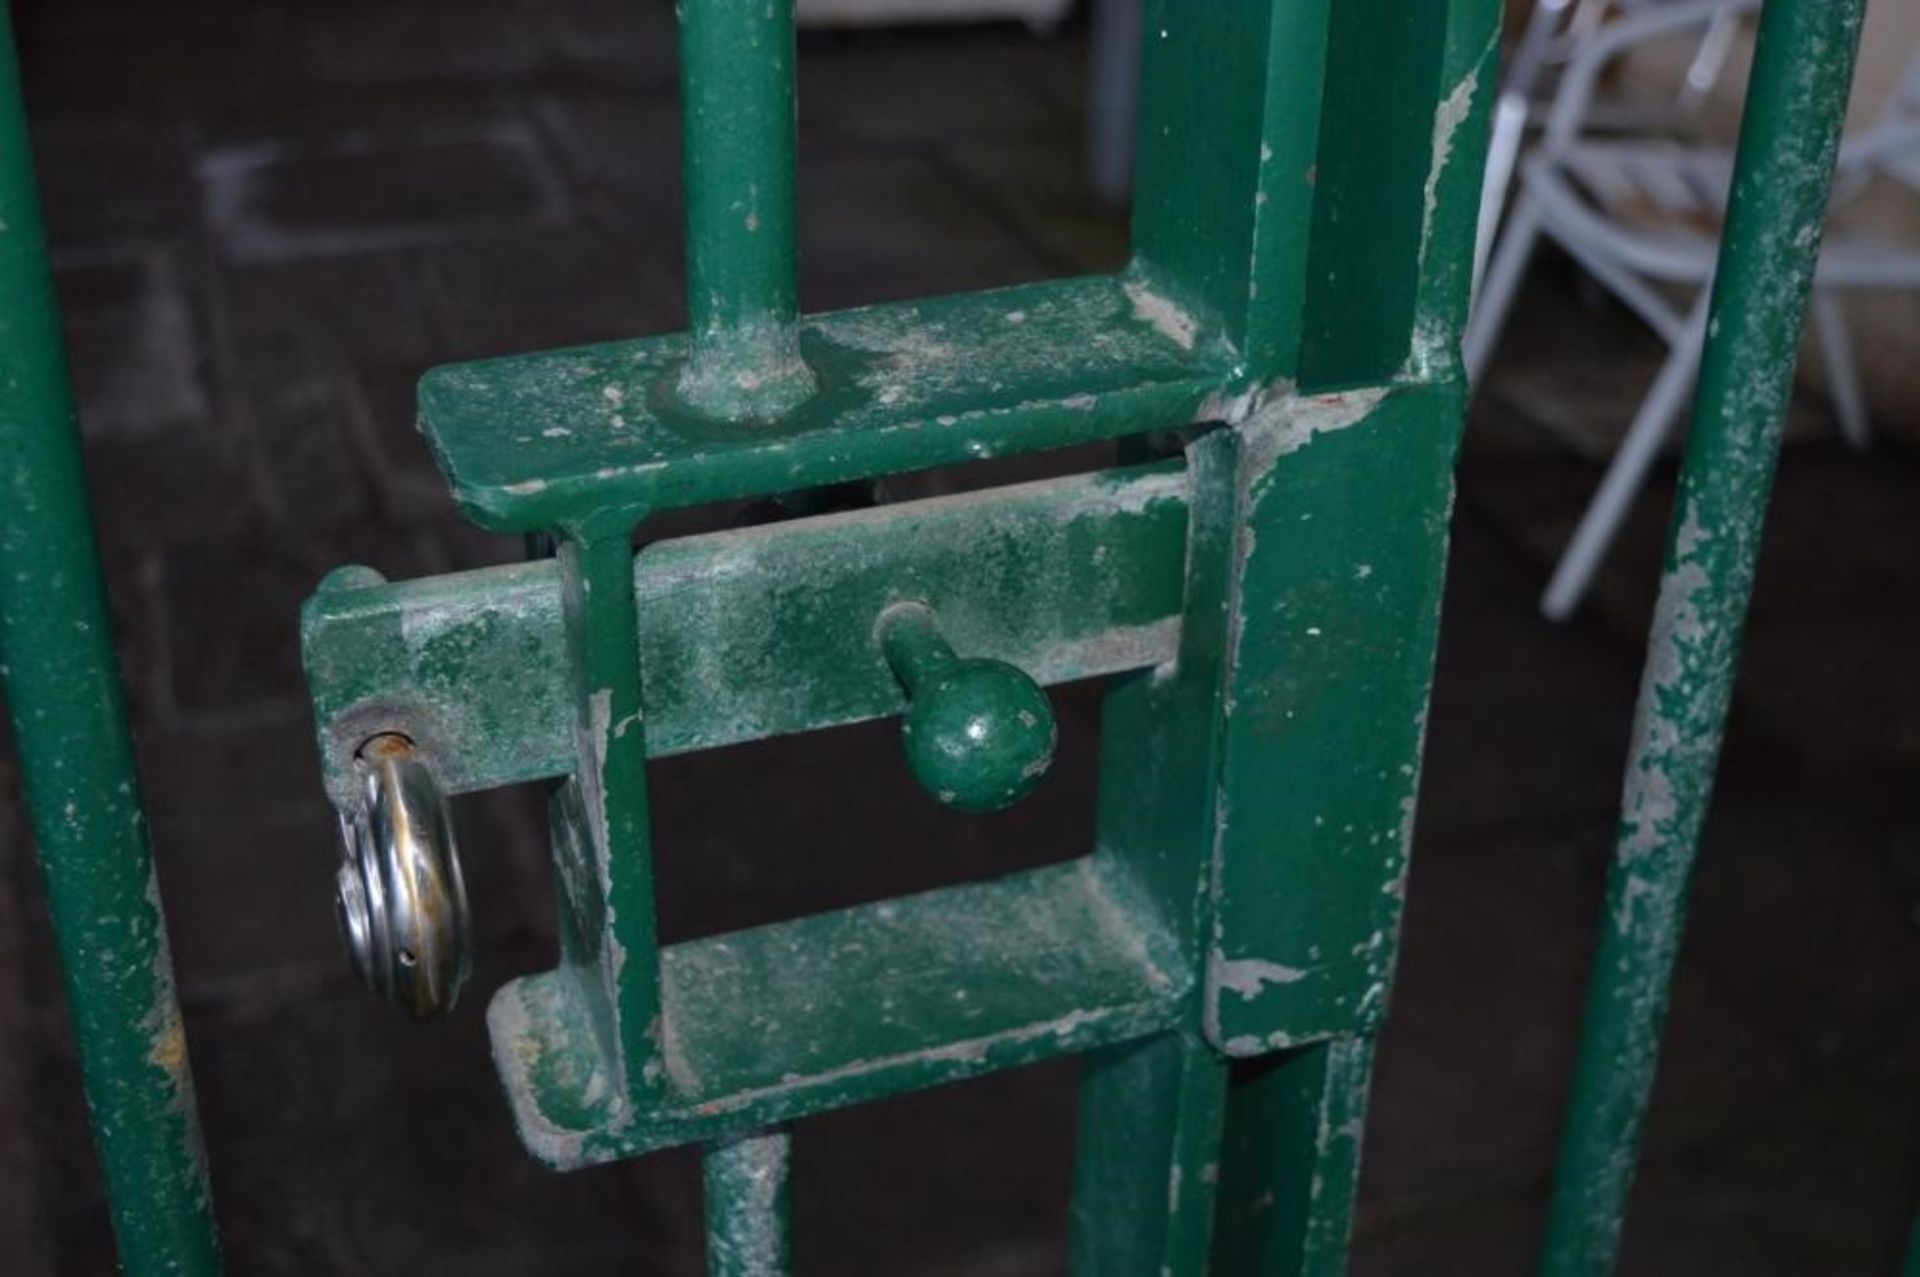 5 x Sections of Industrial Green Spear Security Fencing Including Double Gates - 51 Feet in Length a - Image 6 of 9